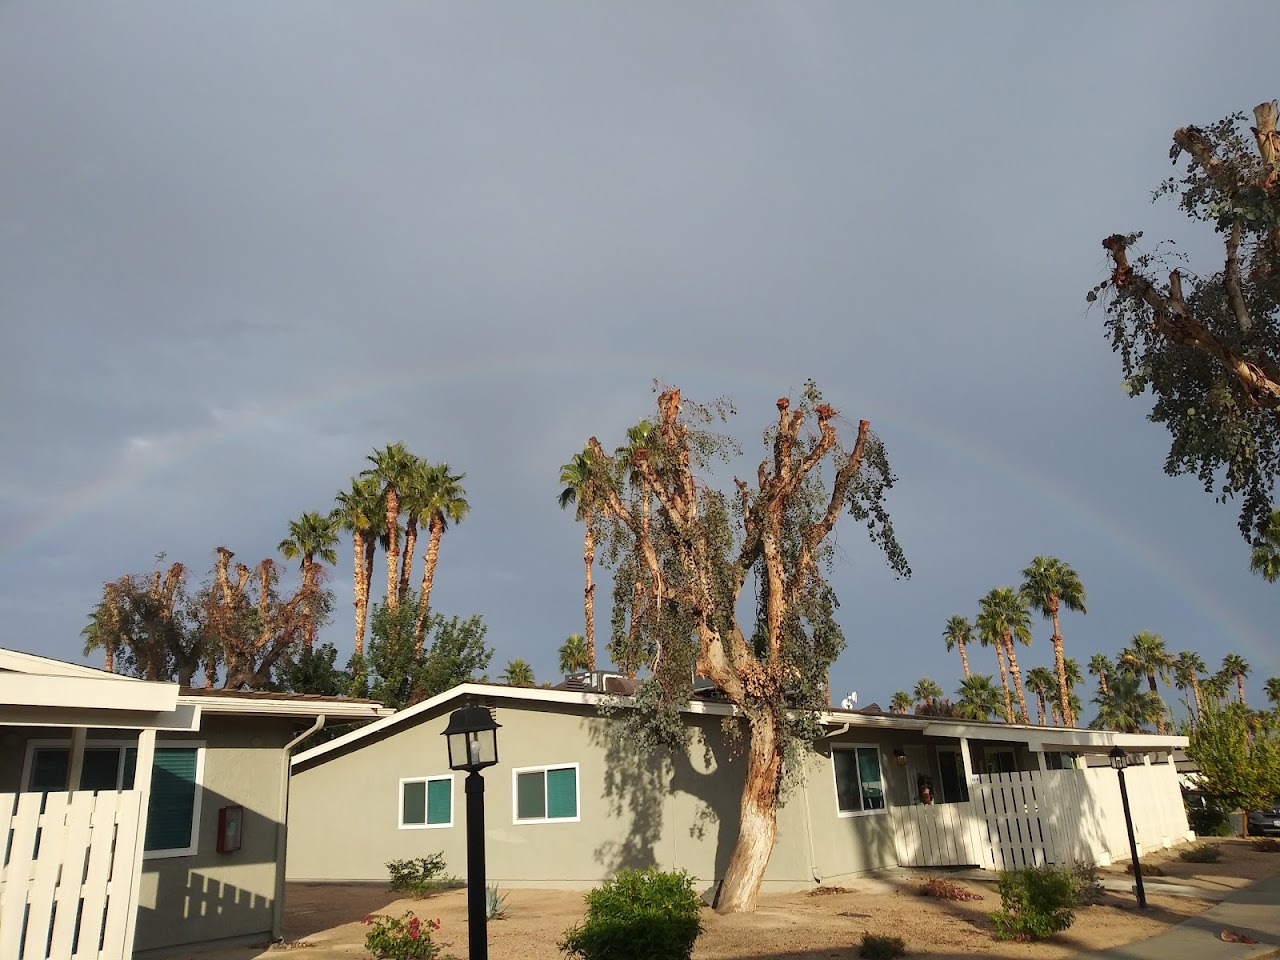 Photo of MOUNTAIN VIEW APARTMENTS. Affordable housing located at 68680 DINAH SHORE DRIVE CATHEDRAL CITY, CA 92234